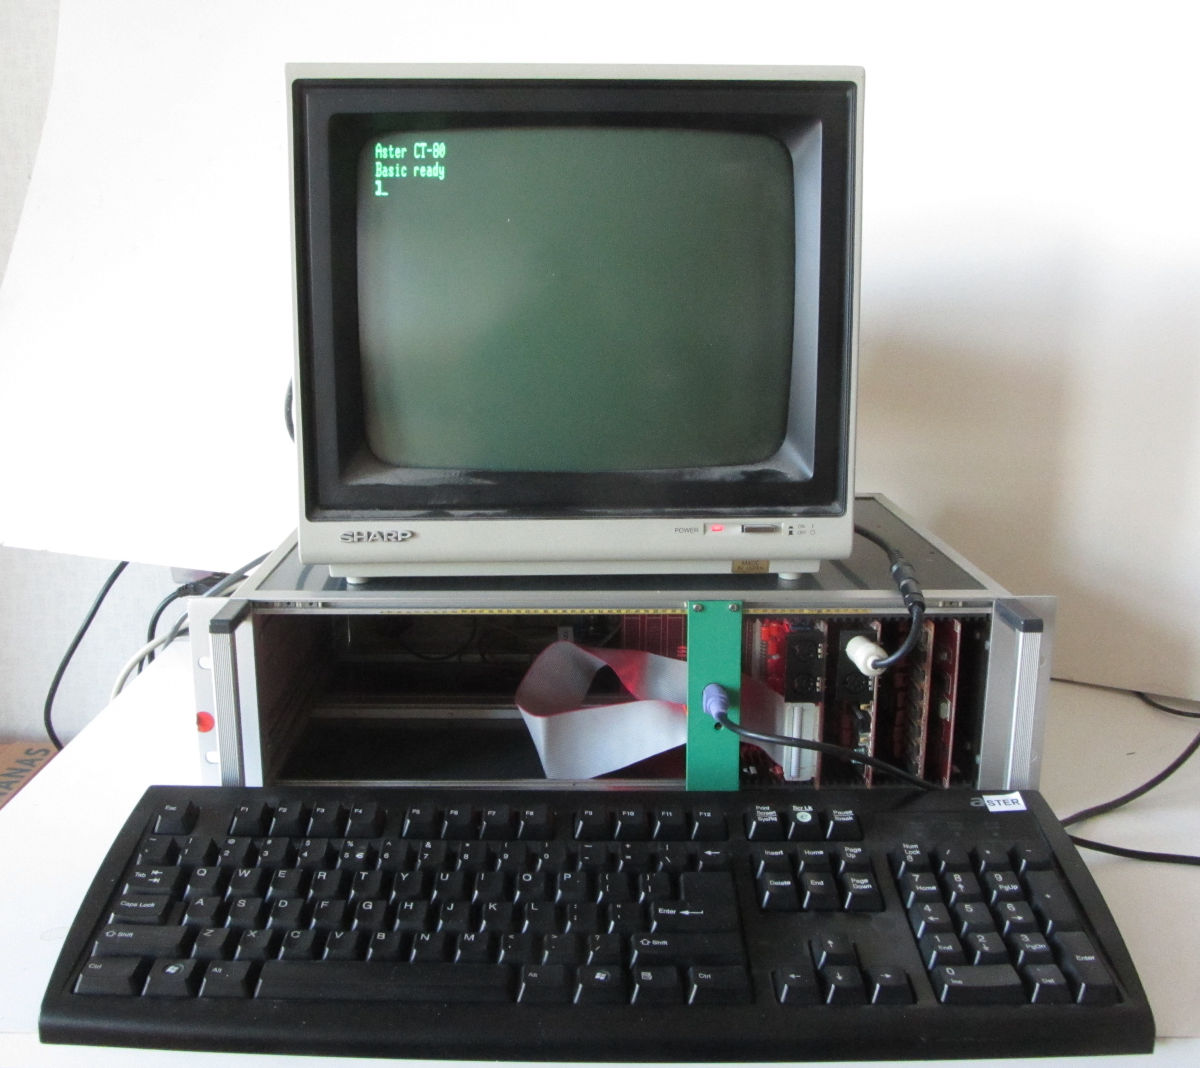 The rack based Aster computer.